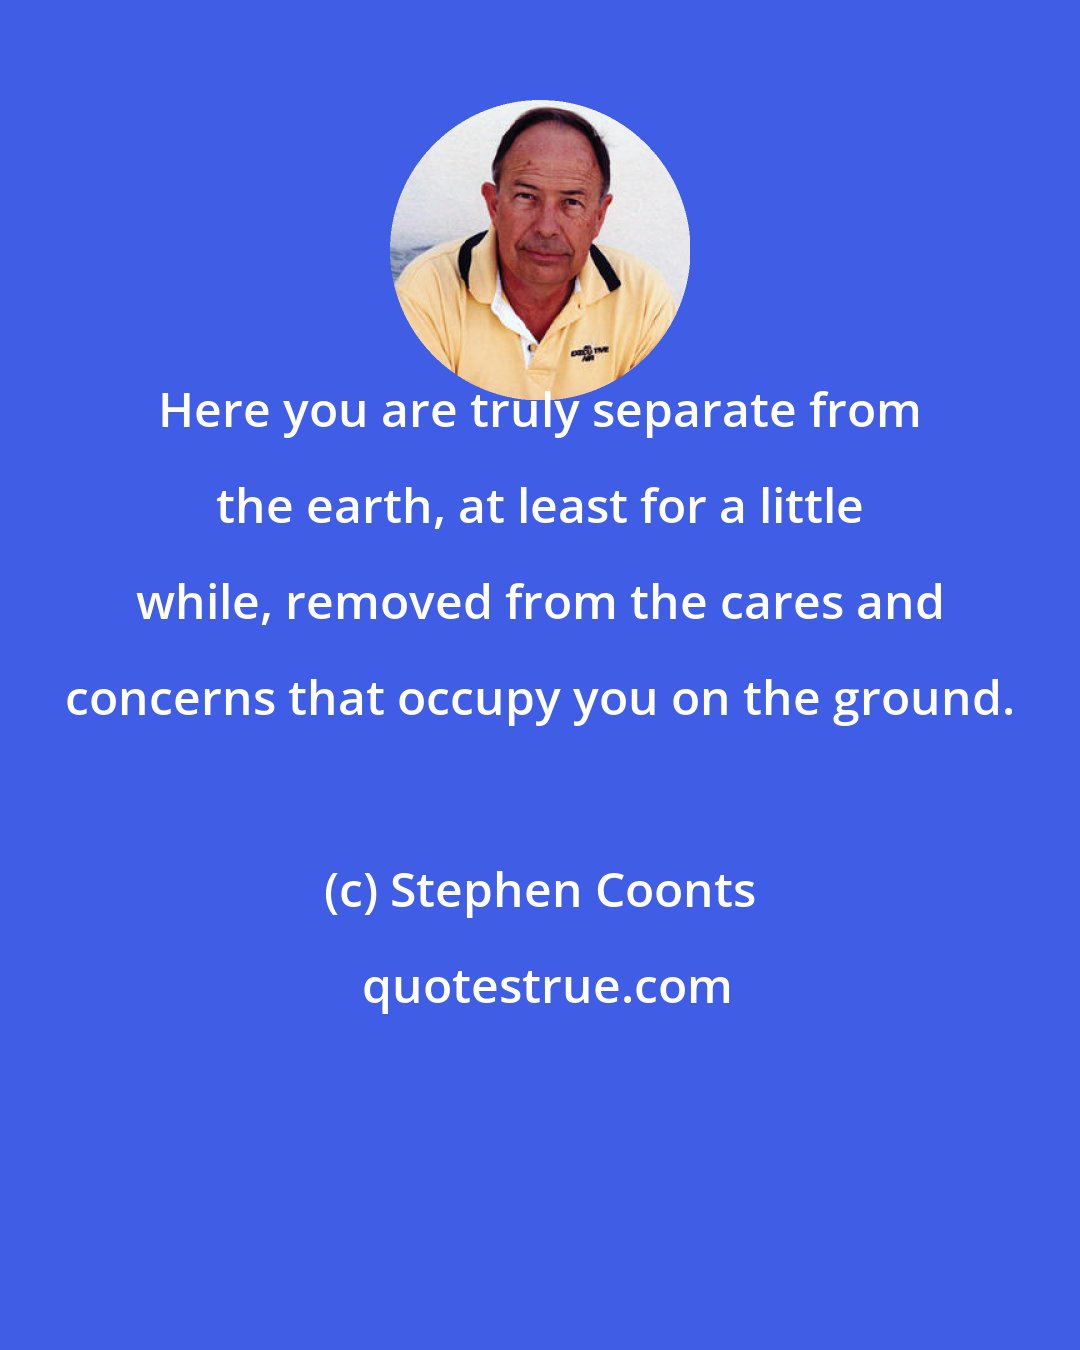 Stephen Coonts: Here you are truly separate from the earth, at least for a little while, removed from the cares and concerns that occupy you on the ground.